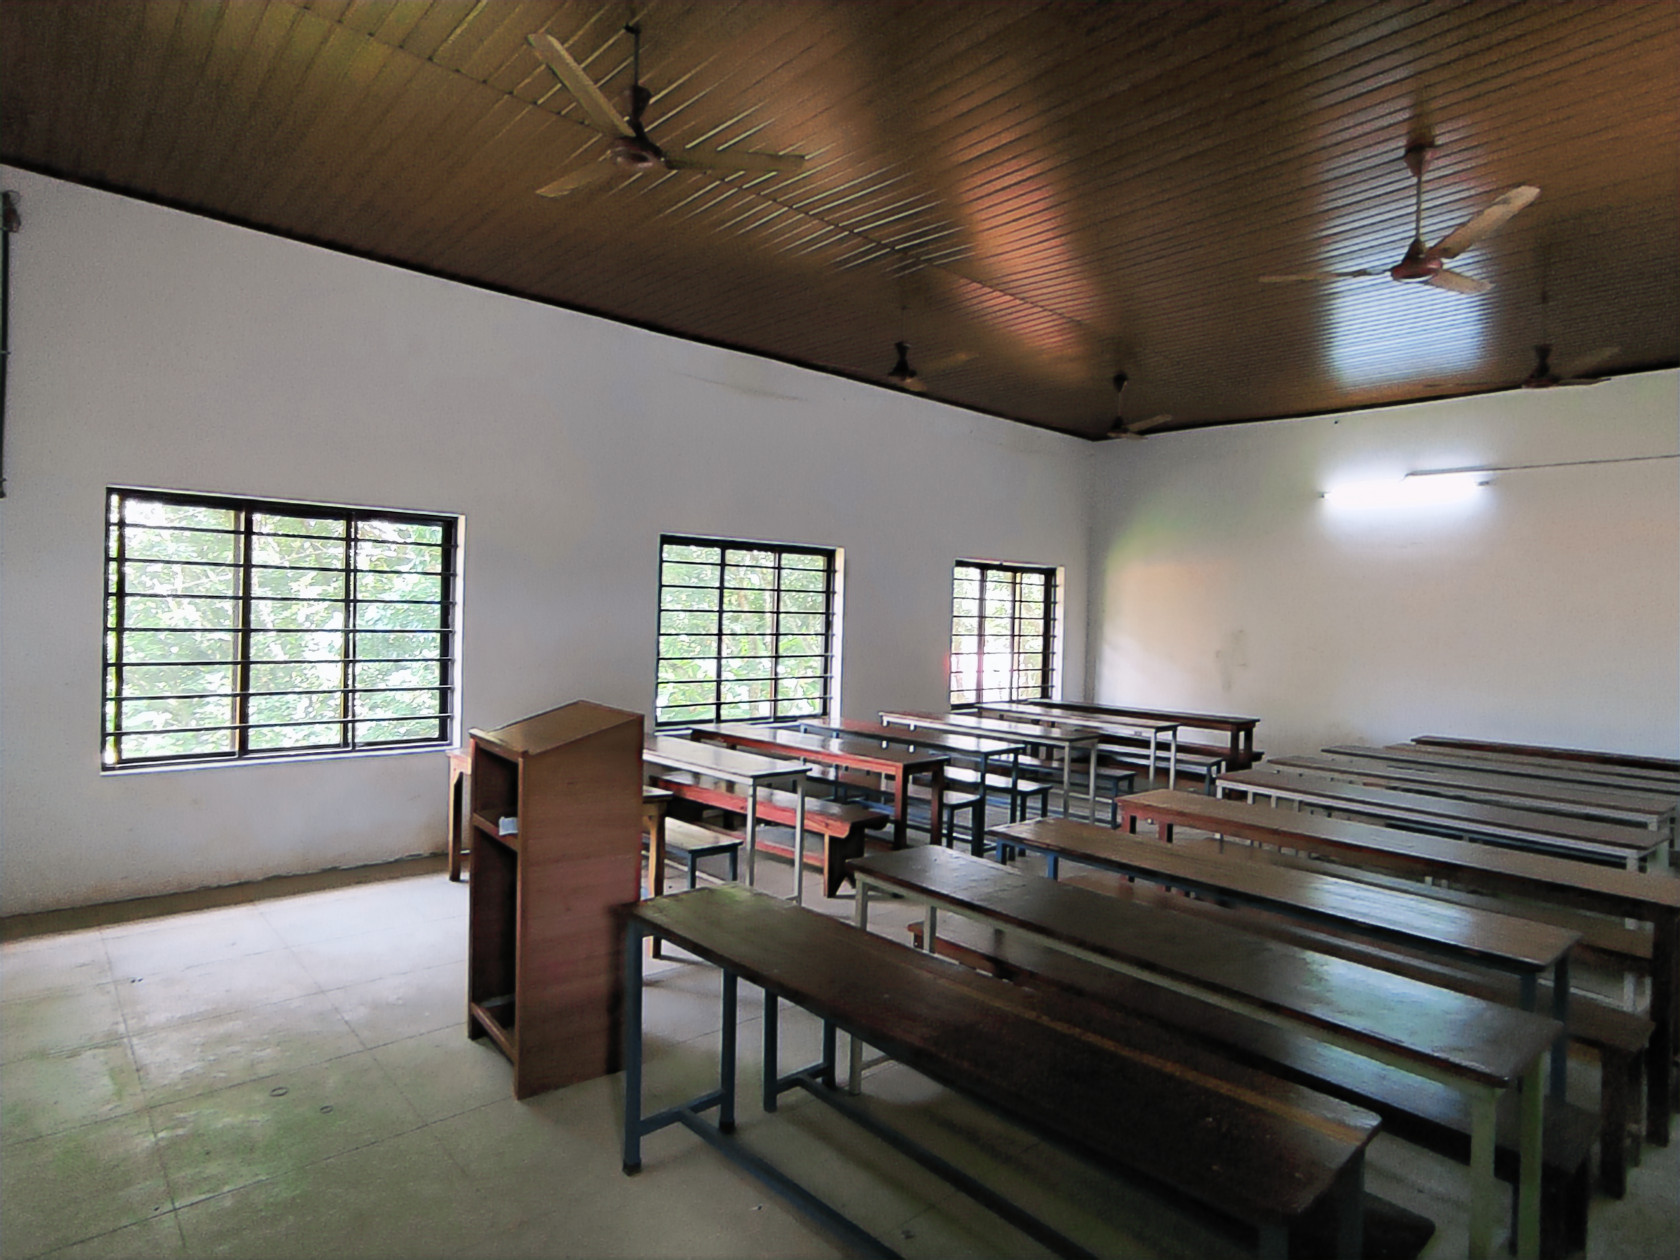 one of the lecture rooms of the college, with a lectern, student seating and three fairly large windows